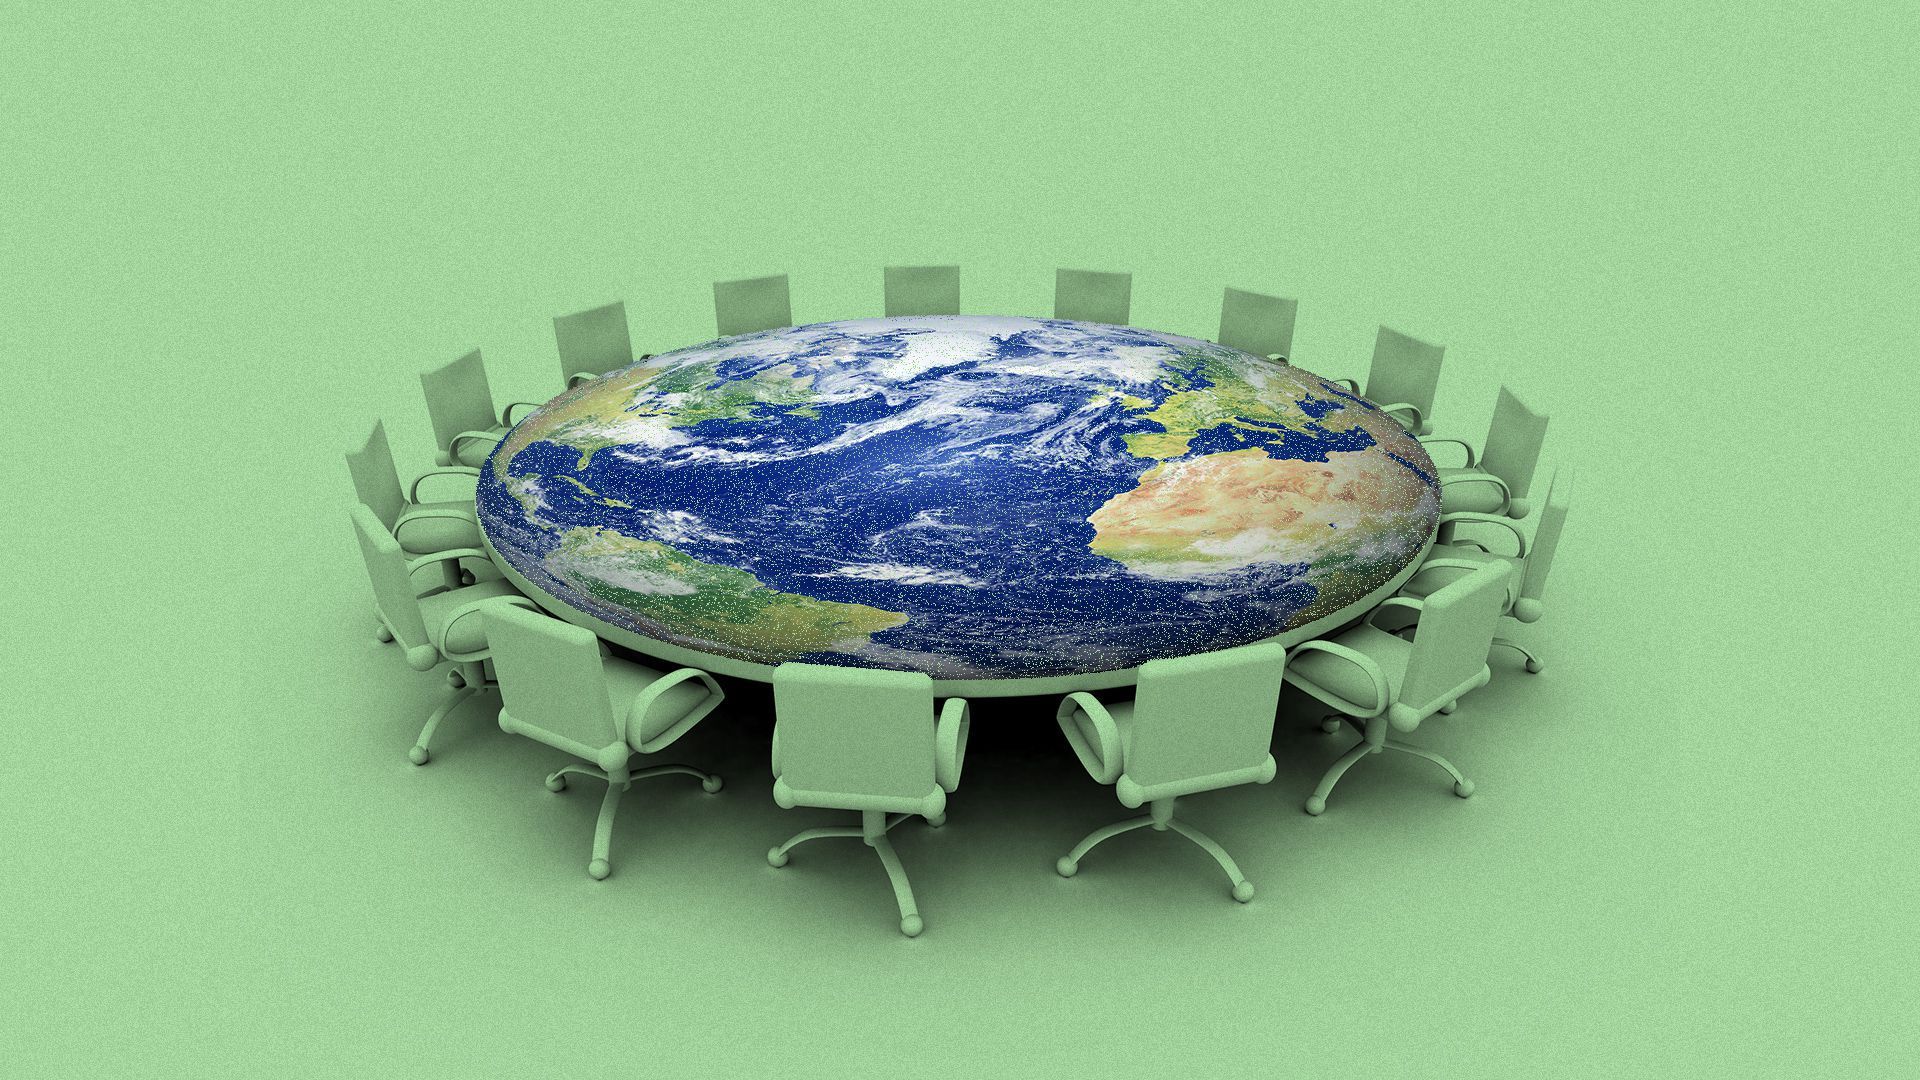 Green chairs around a world table